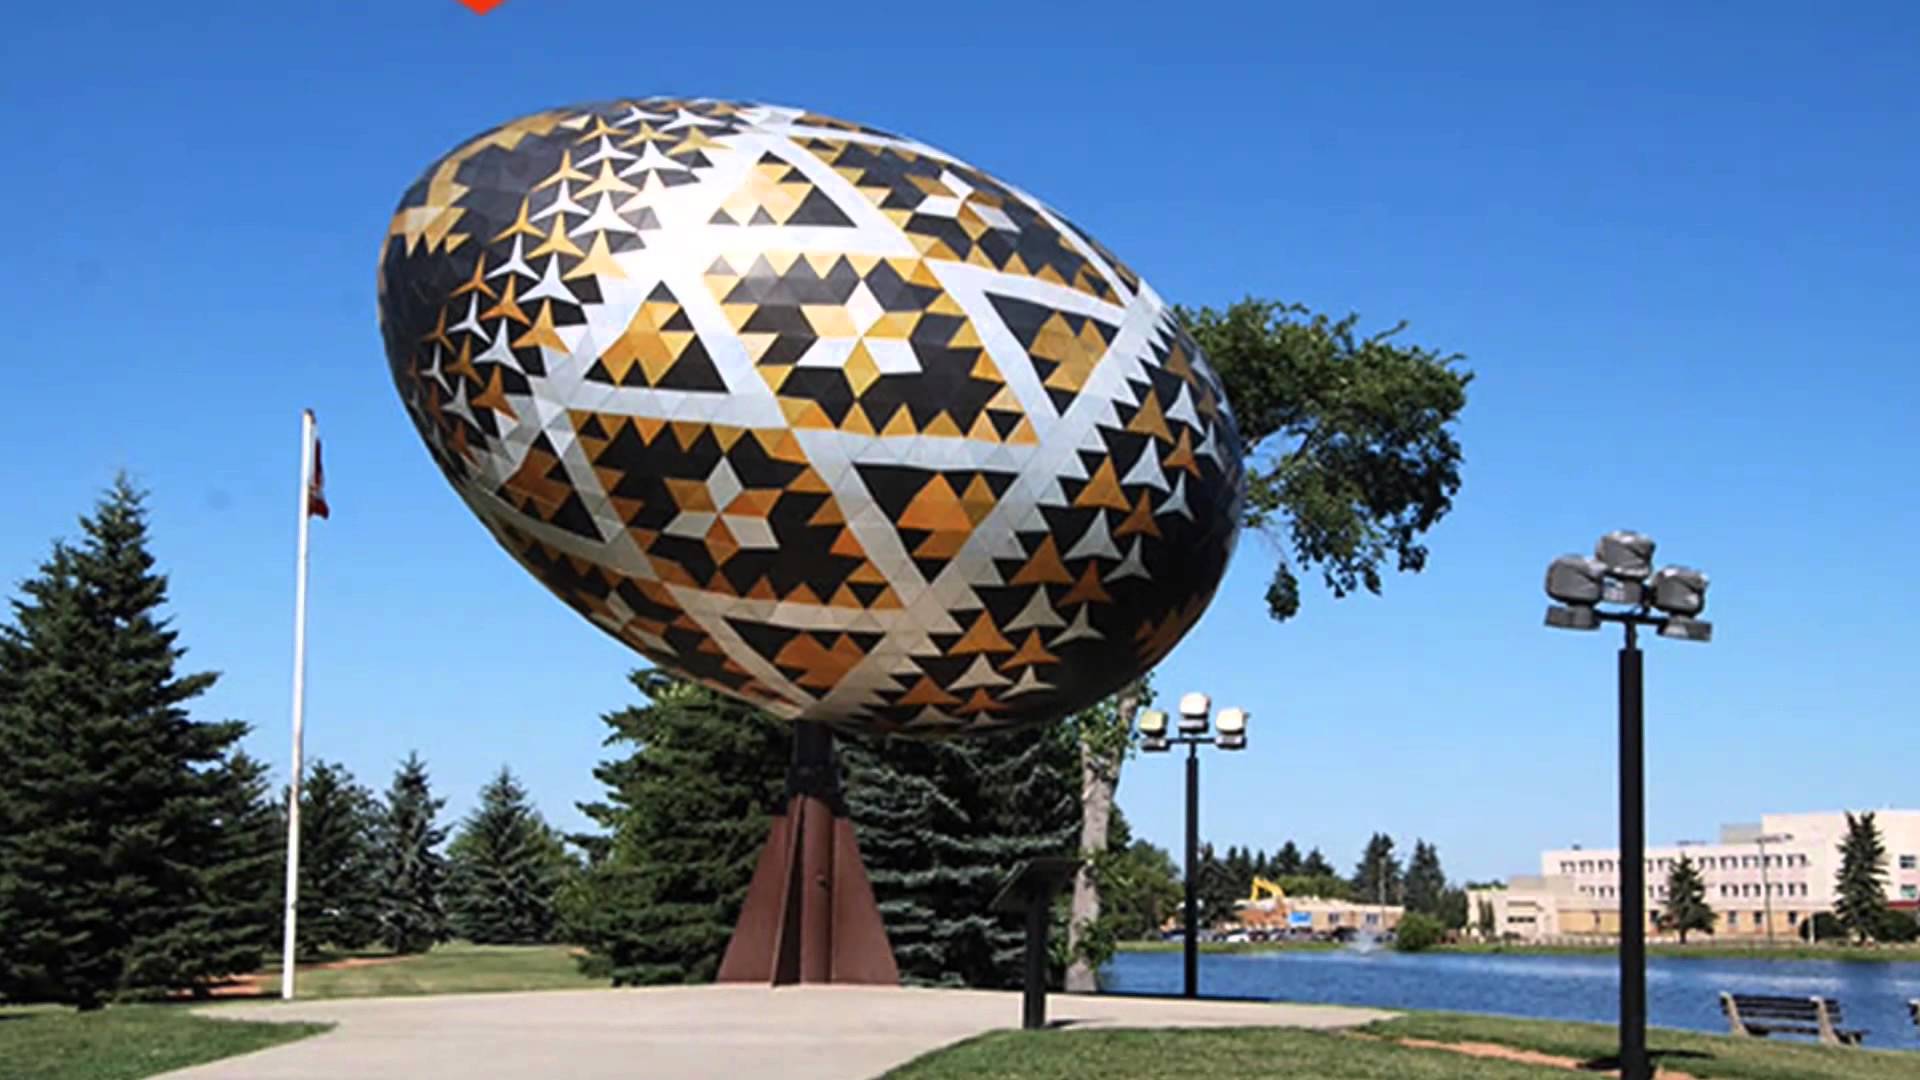 25 Roadside Attractions That Are So Big You'll Want To Go On A Road